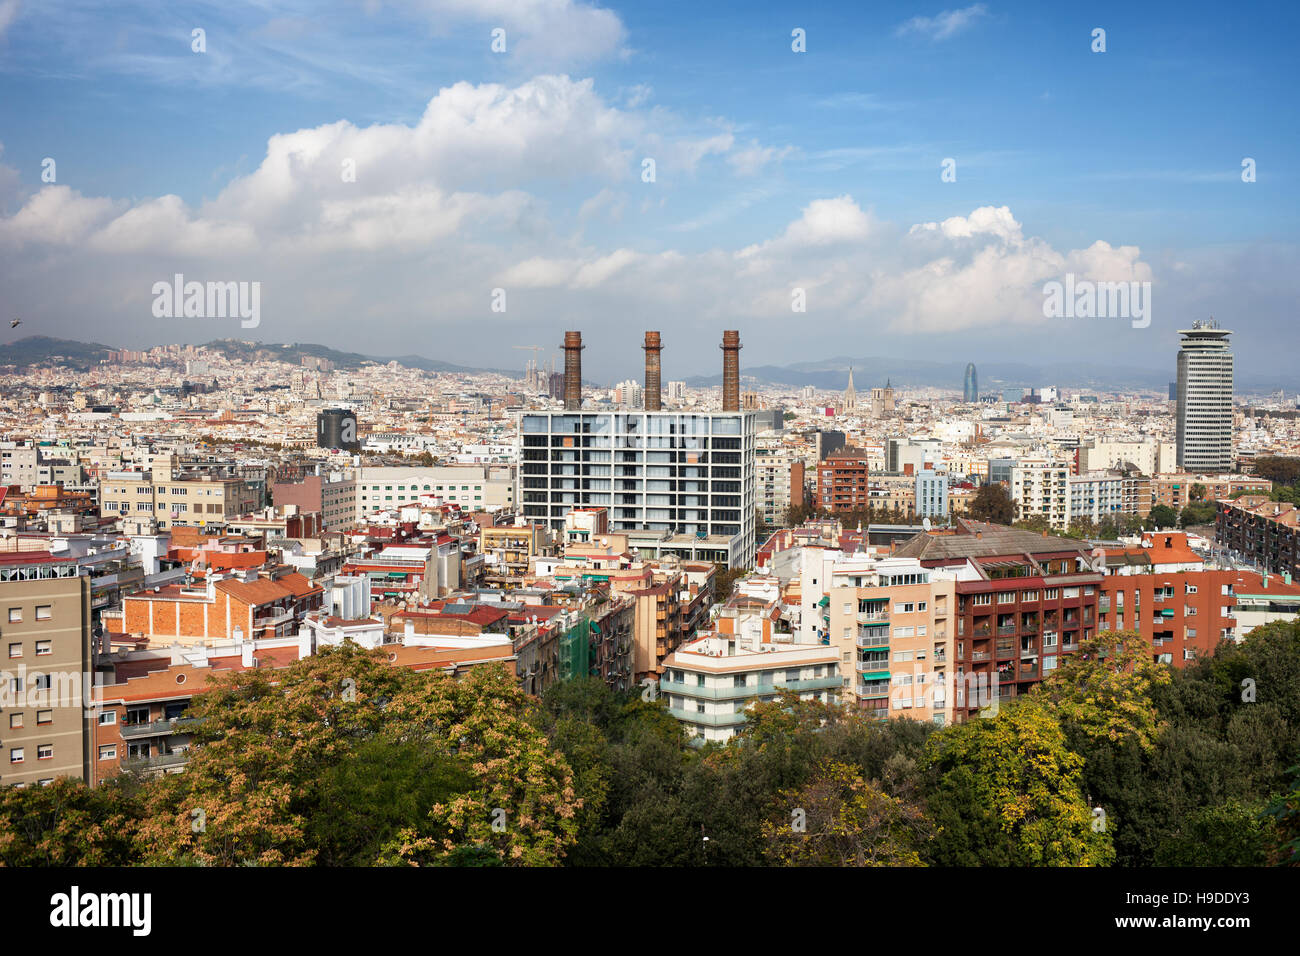 City of Barcelona cityscape, on first plan El Poble Sec neighbourhood of Sants-Montjuic district, Catalonia, Spain Stock Photo